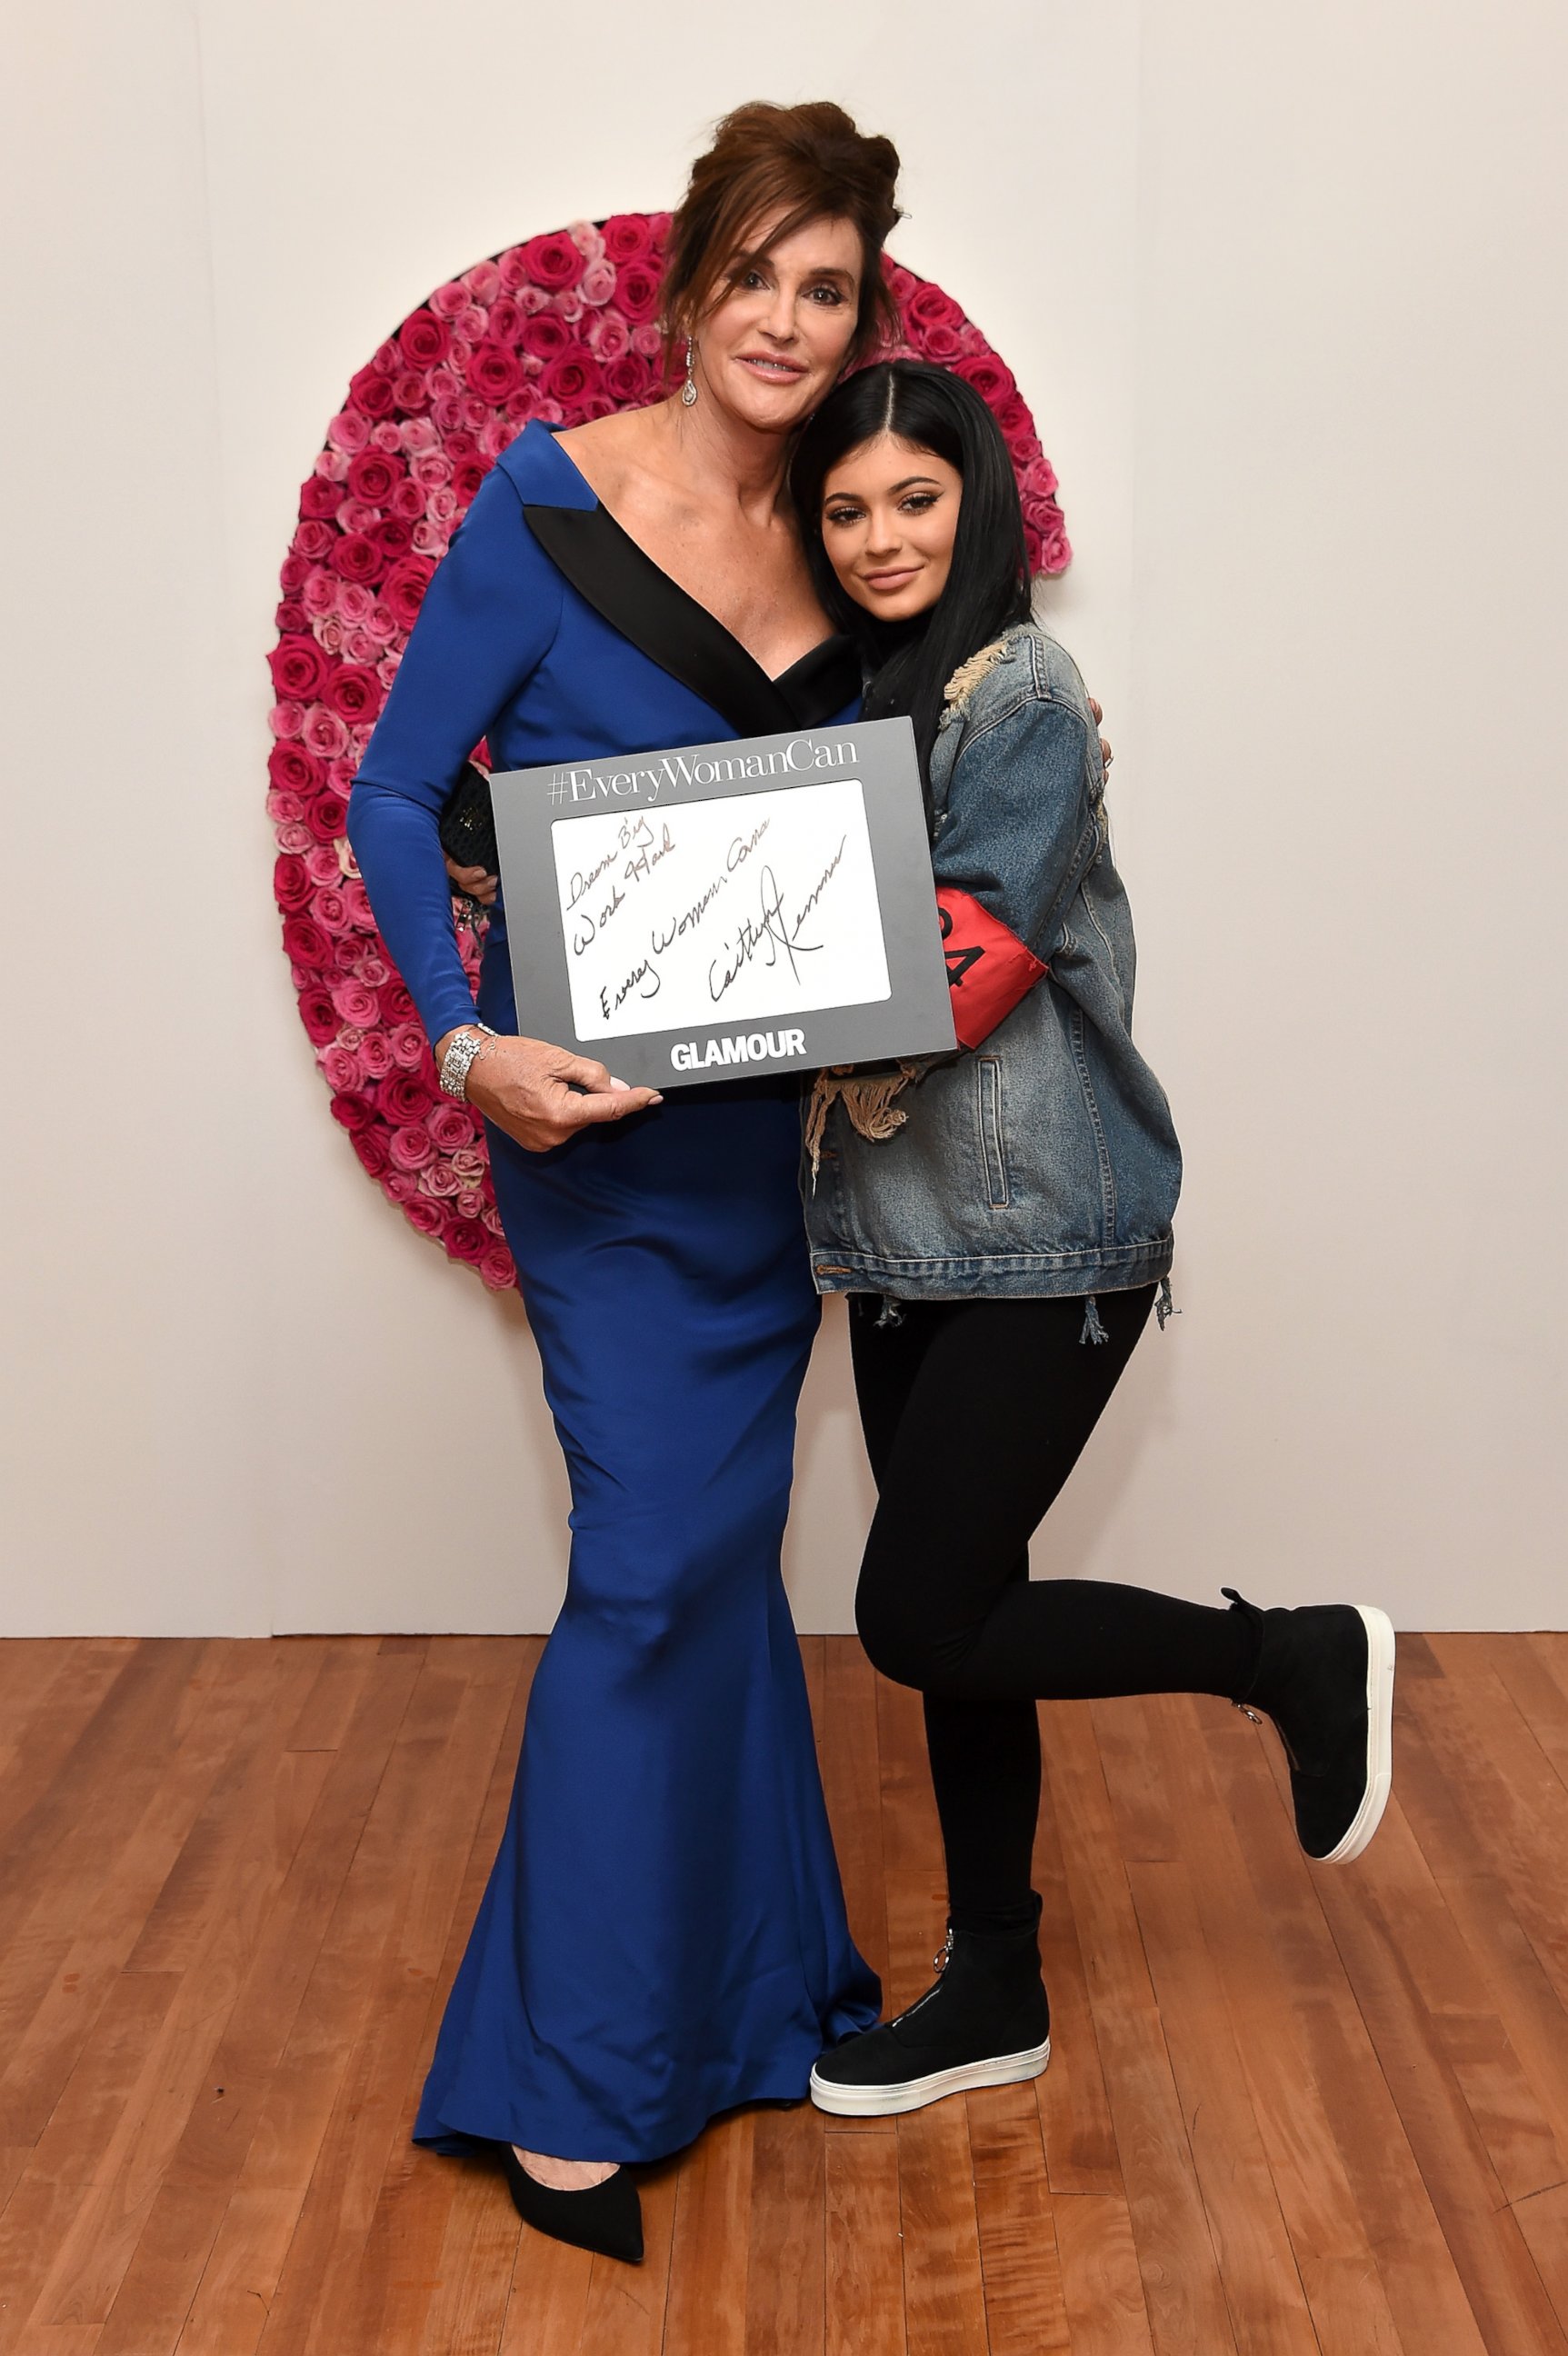 PHOTO:Caitlyn Jenner and Kylie Jenner pose for a photo at the backstage inspiration wall at the 2015 Glamour Women of the Year Awards at Carnegie Hall on Nov. 9, 2015 in New York.  